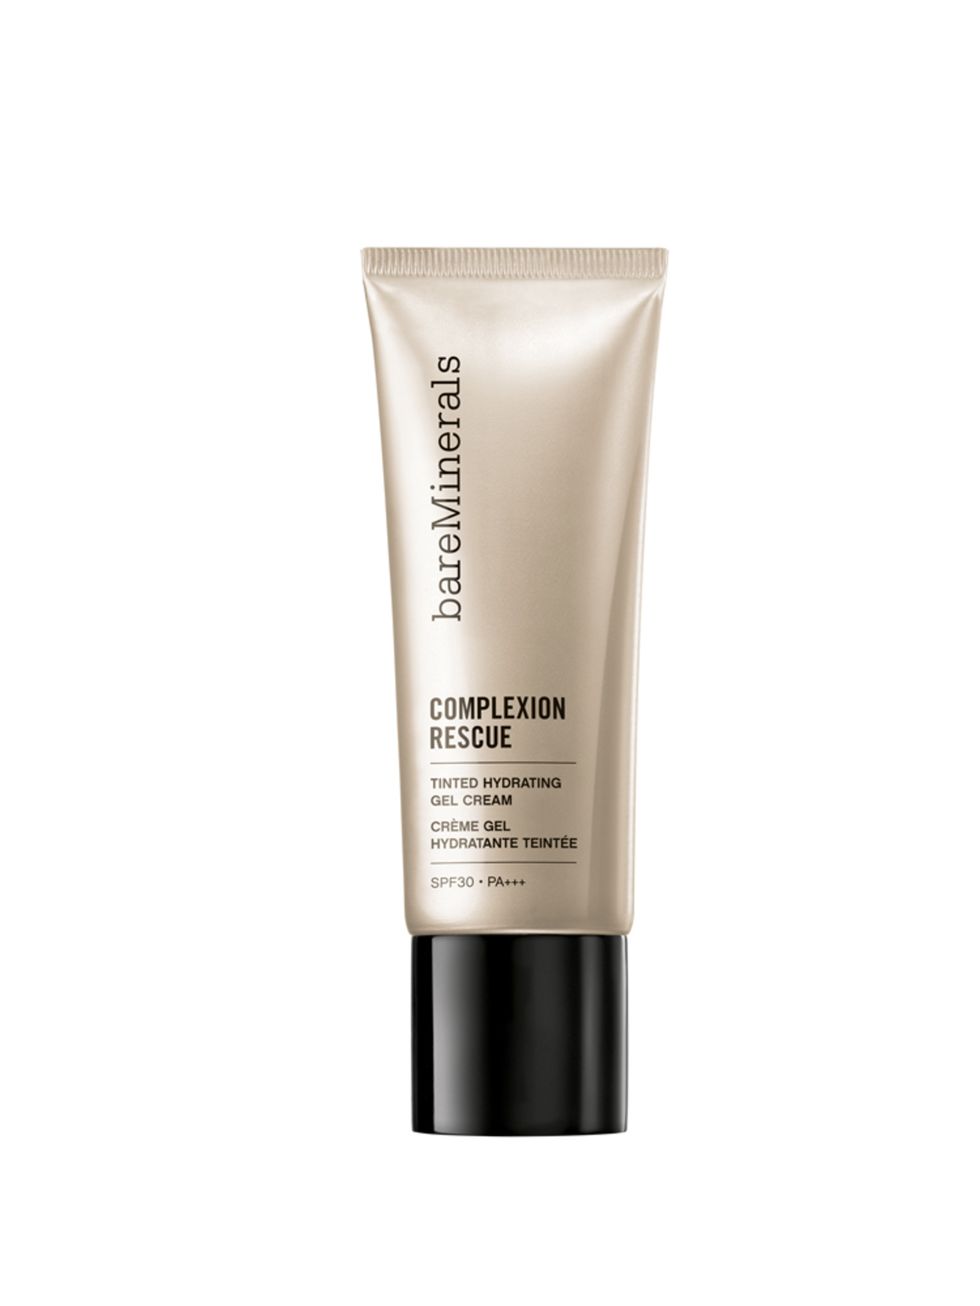 <p>Apply foundation over your face, focussing on your T-zone (forehead, nose and chin) for a light looking finish. <a href="http://www.bareminerals.co.uk">Bare Minerals Complexion Rescue, £26.00</a></p>